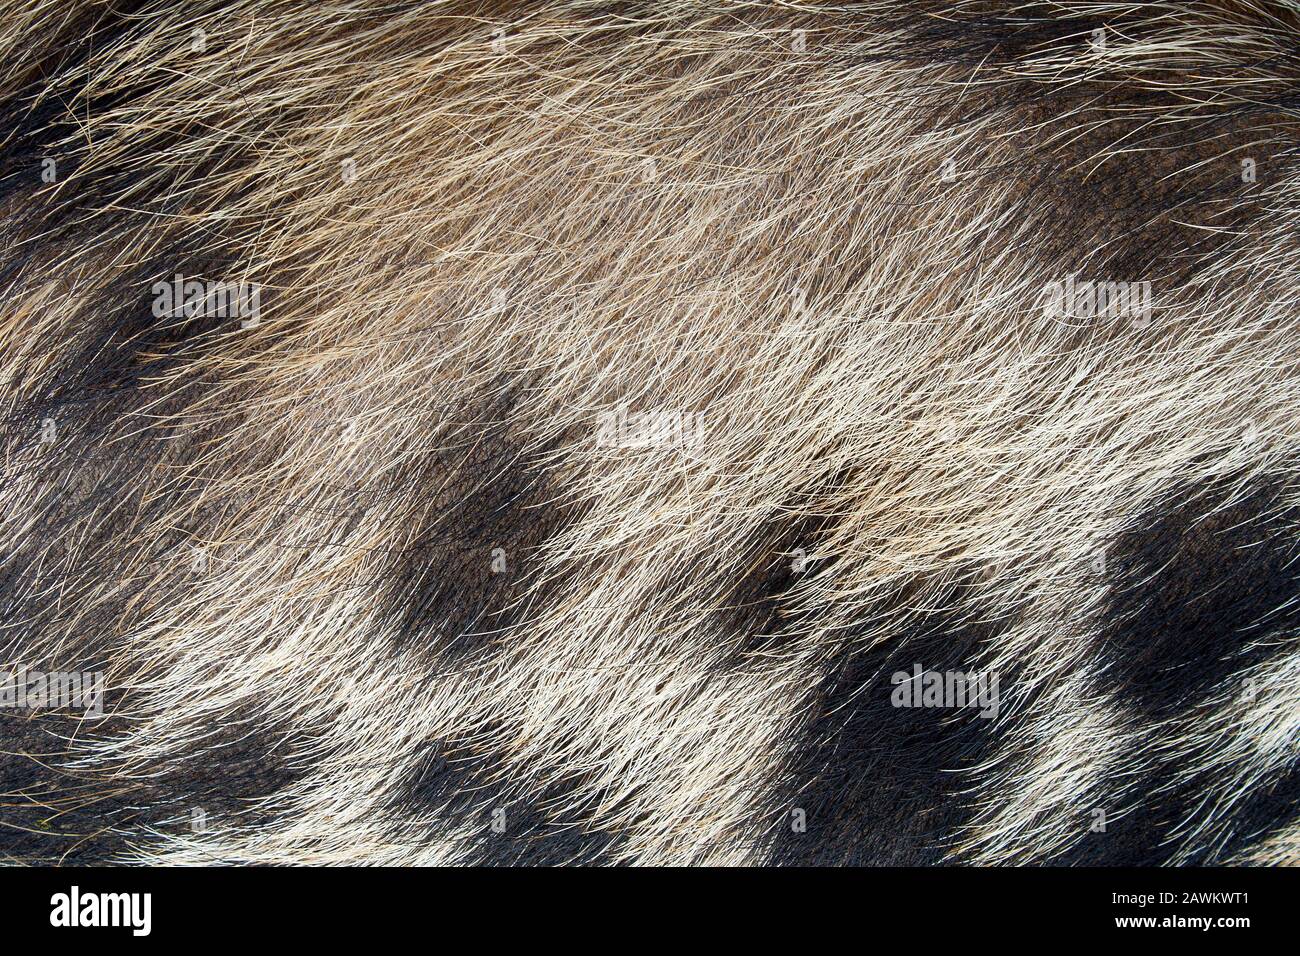 Hairy pig skin texture close up with a blotchy brown black and white pattern Stock Photo